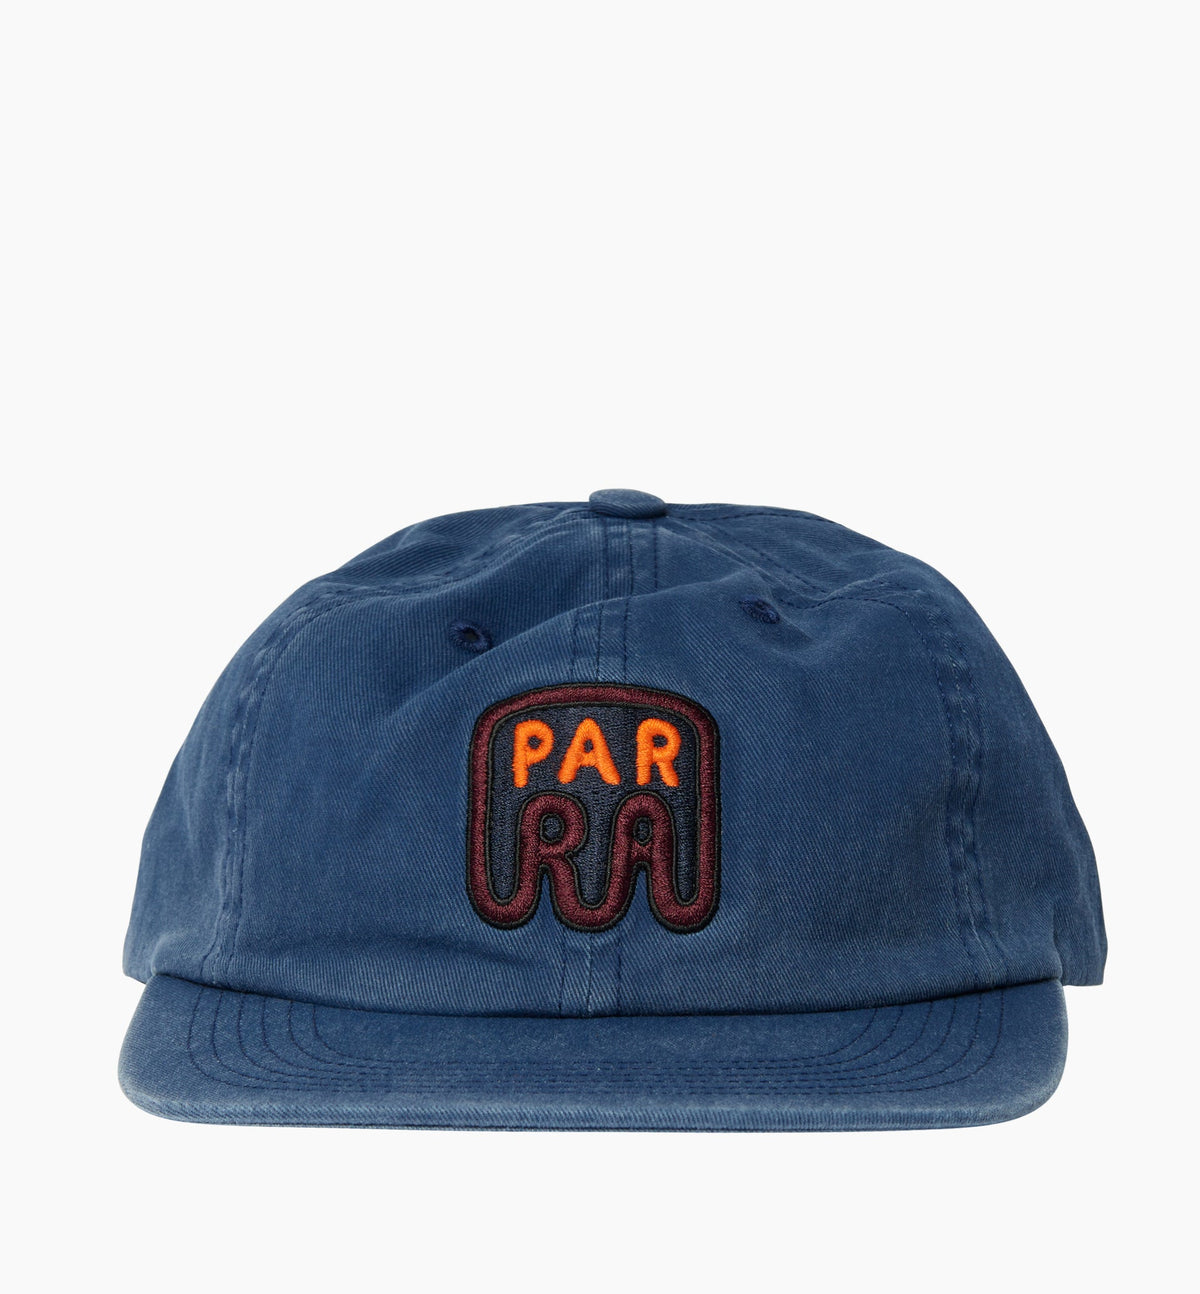 BY PARRA FAST FOOD LOGO 6 PANEL